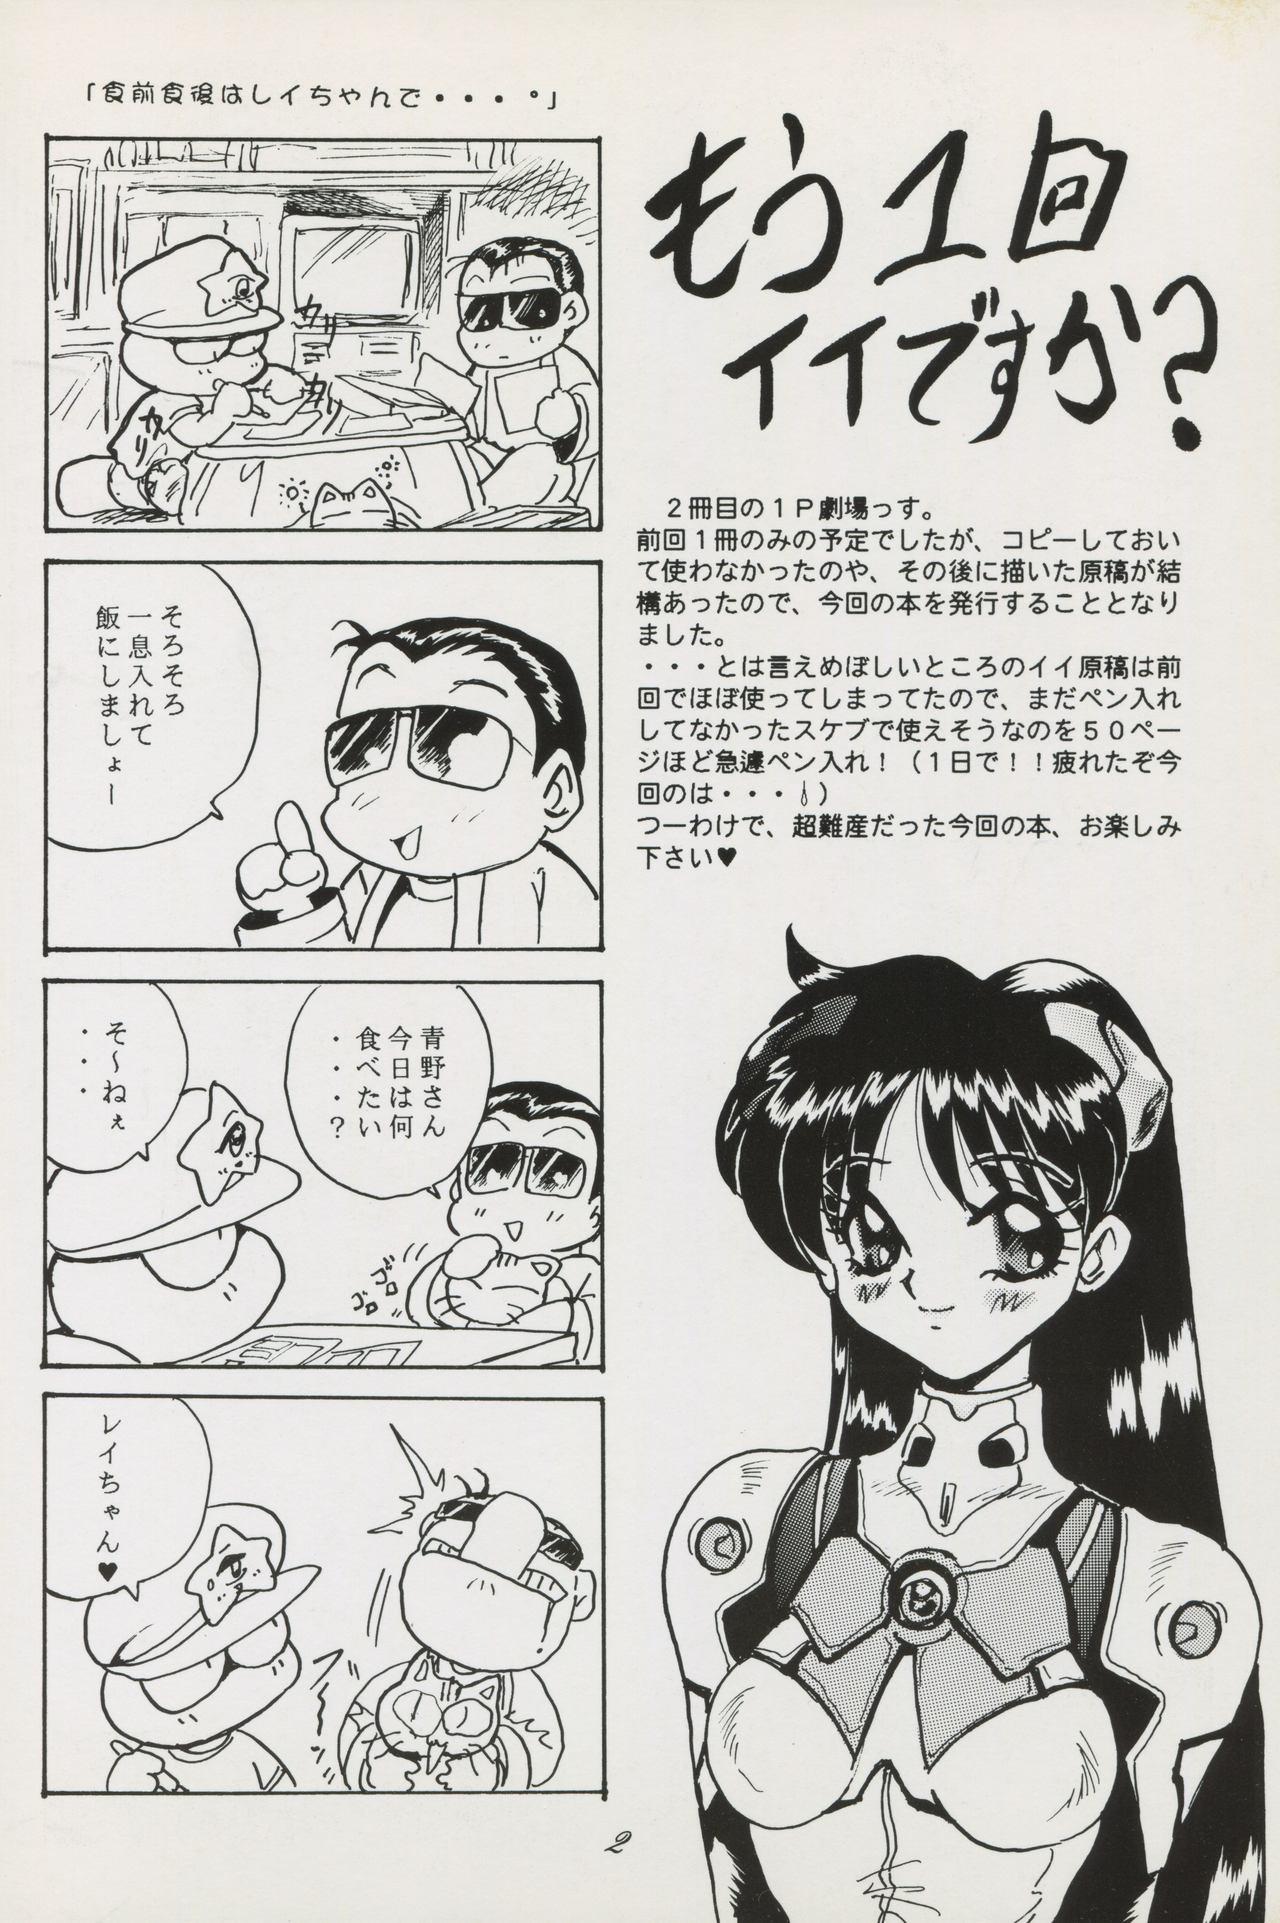 Sailor Moon 1 Page Gekijou P2 - SAILOR MOON ONE PAGE THEATER II 1